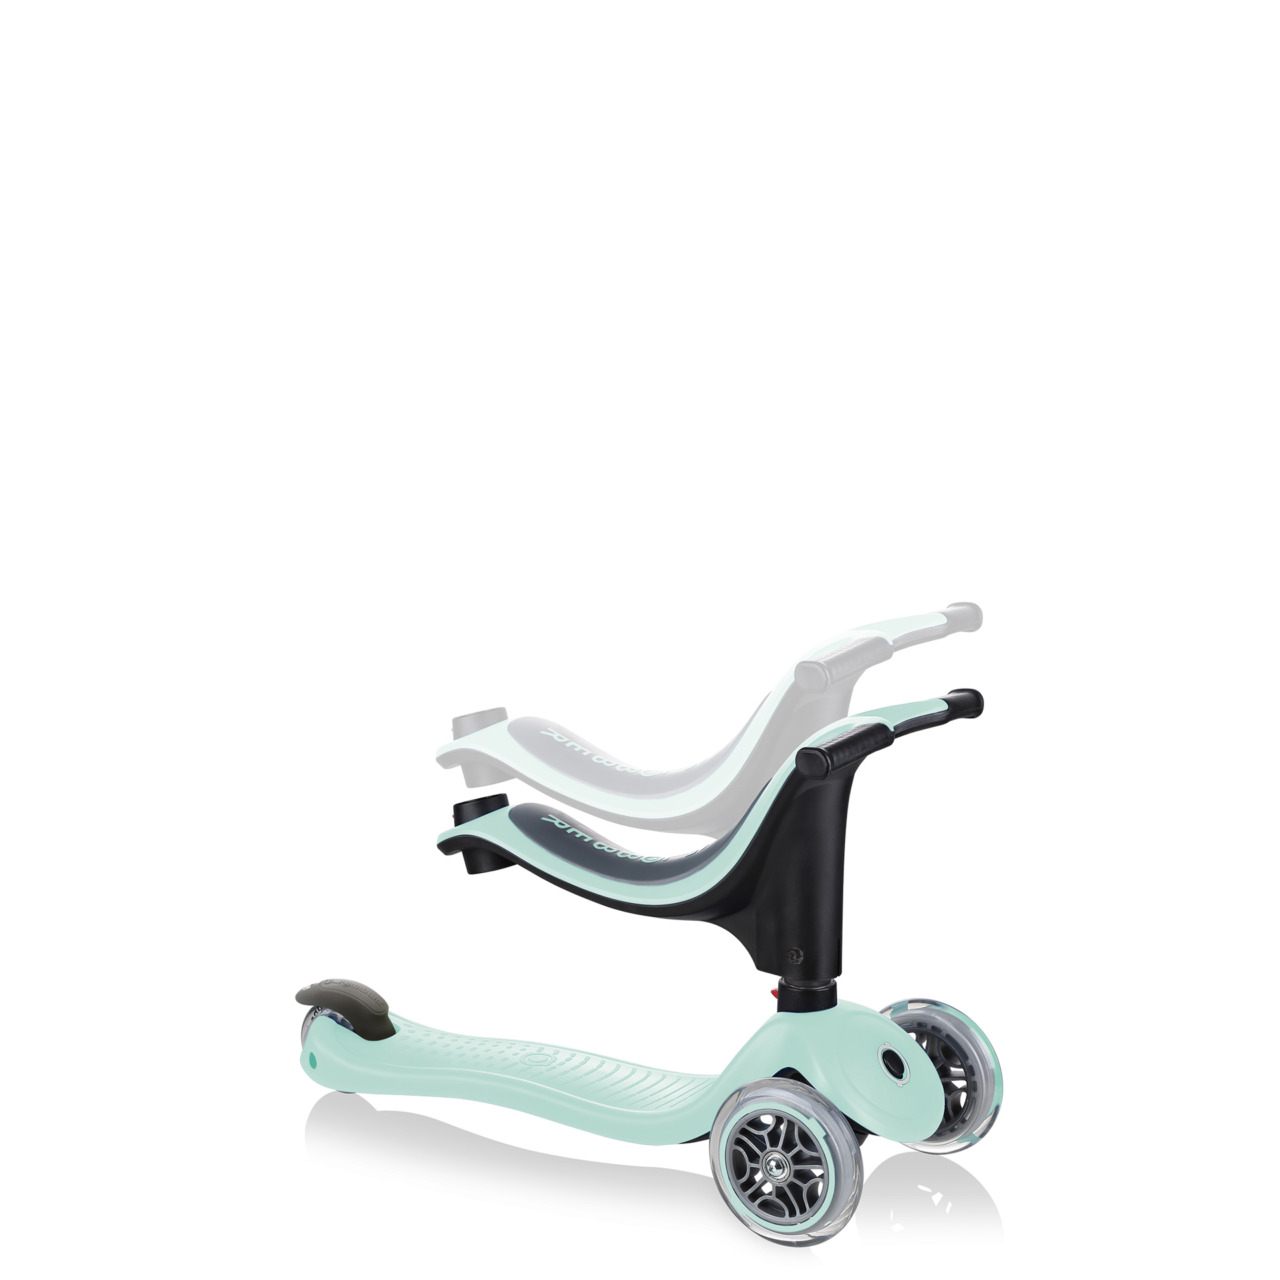 Toddler Scooter With Adjustable Seat